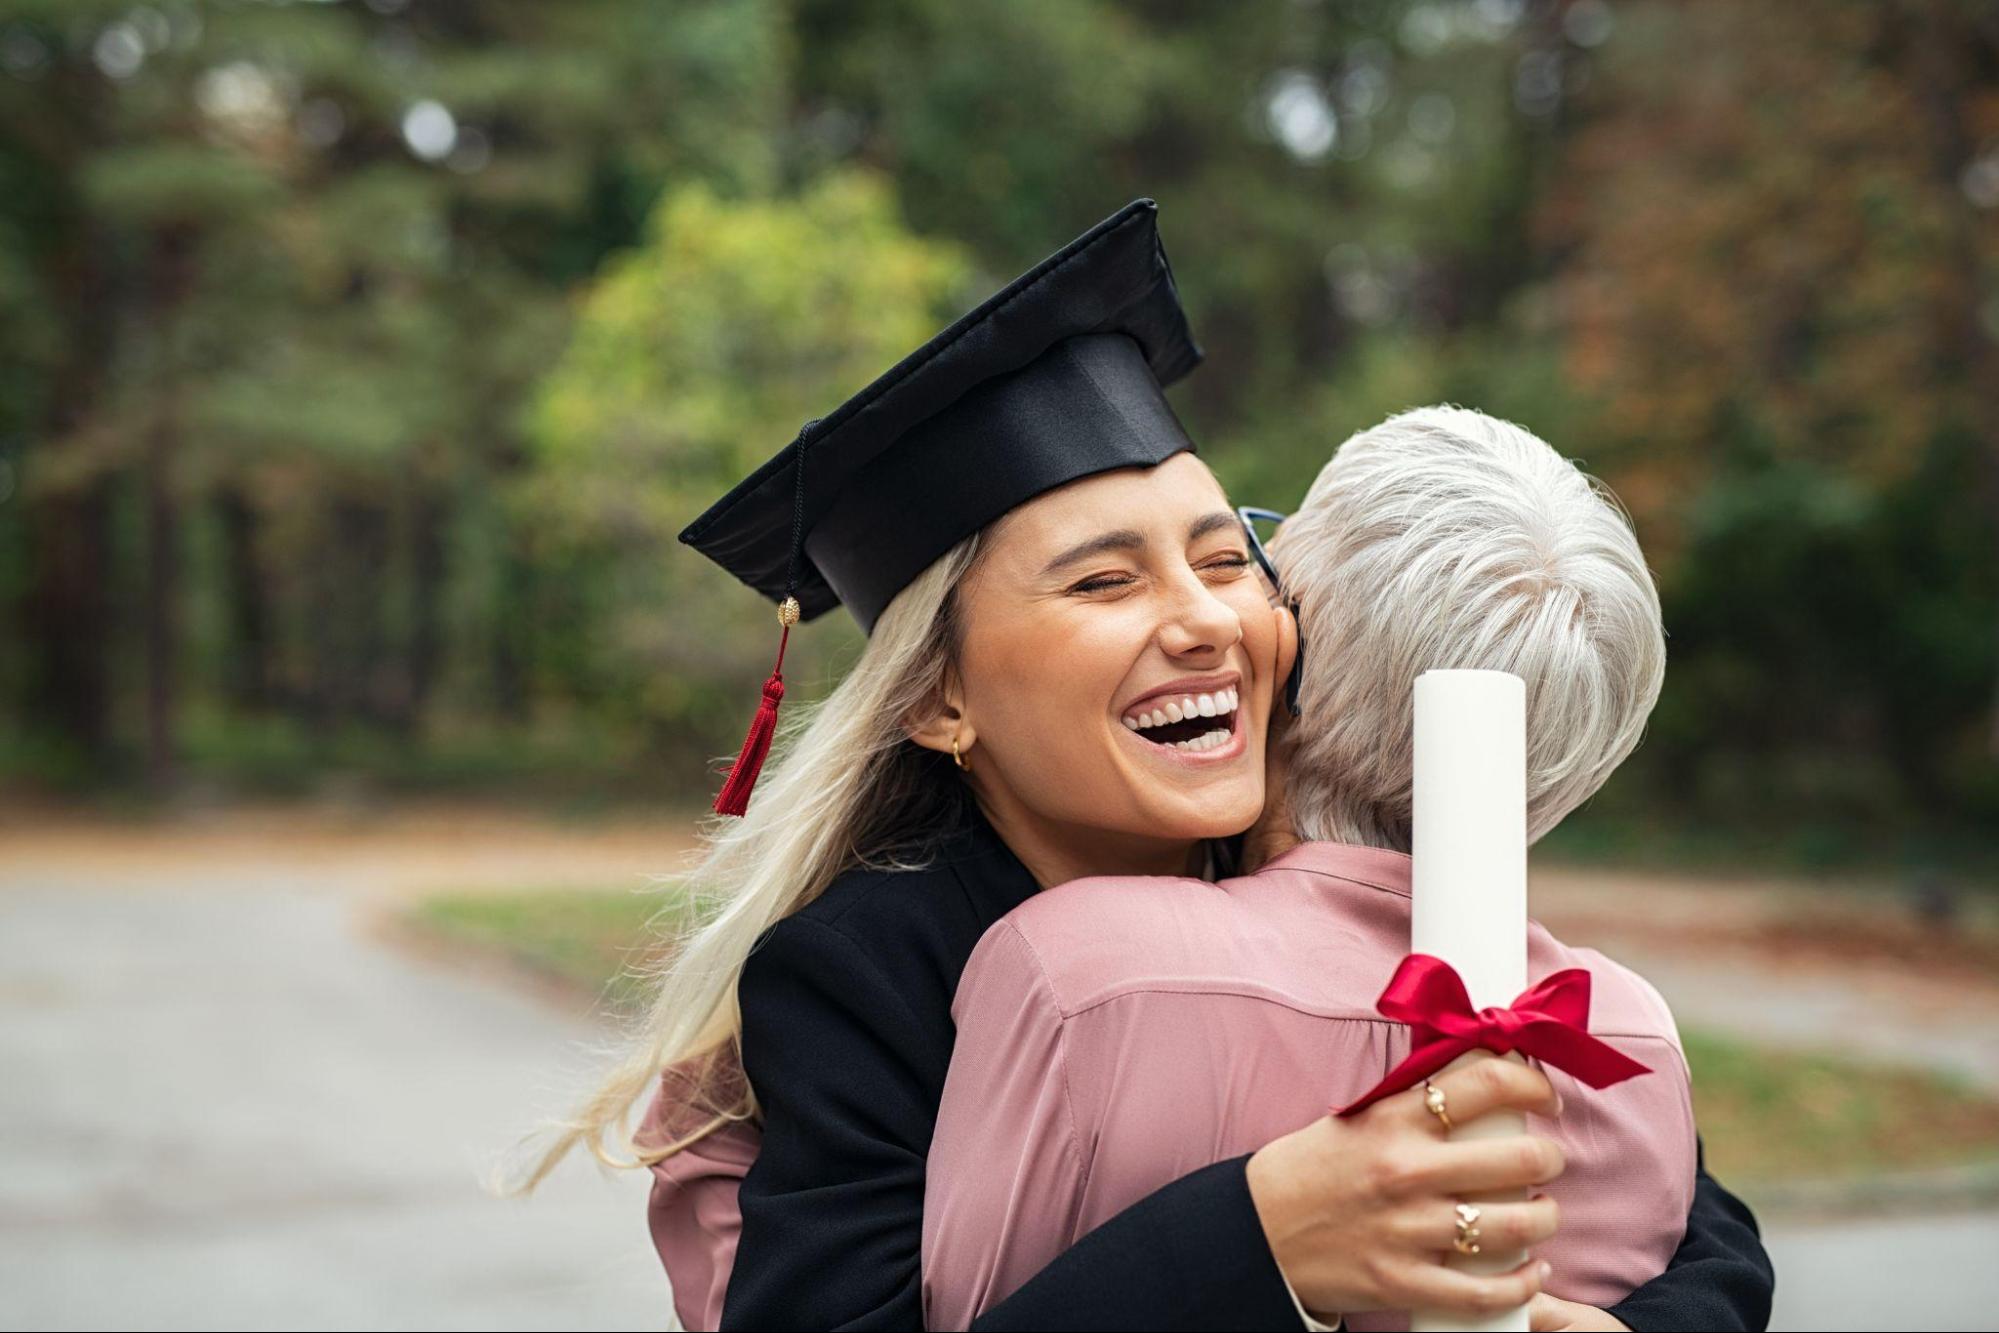 5 Unique Graduation Gifts that Young Adults Will Love